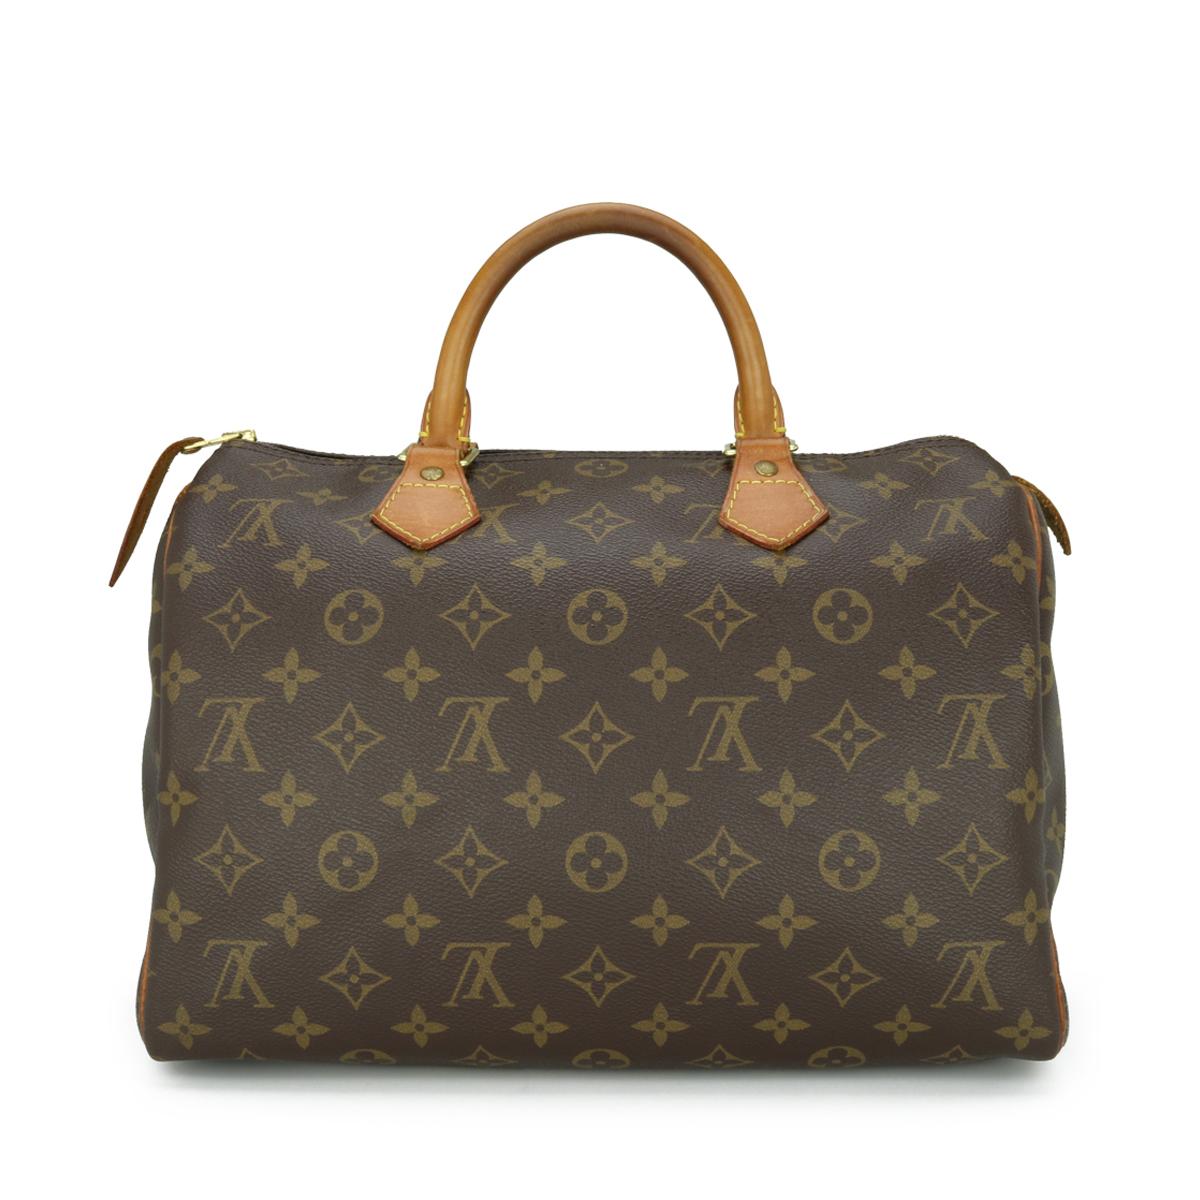 Louis Vuitton Speedy 30 Bag in Monogram 2011.

This bag is in good condition. 

- Exterior Condition: Good condition. Light storage creasing to the canvas. The outside of the bag shows signs of wear - leather/print surface rubbing to four base